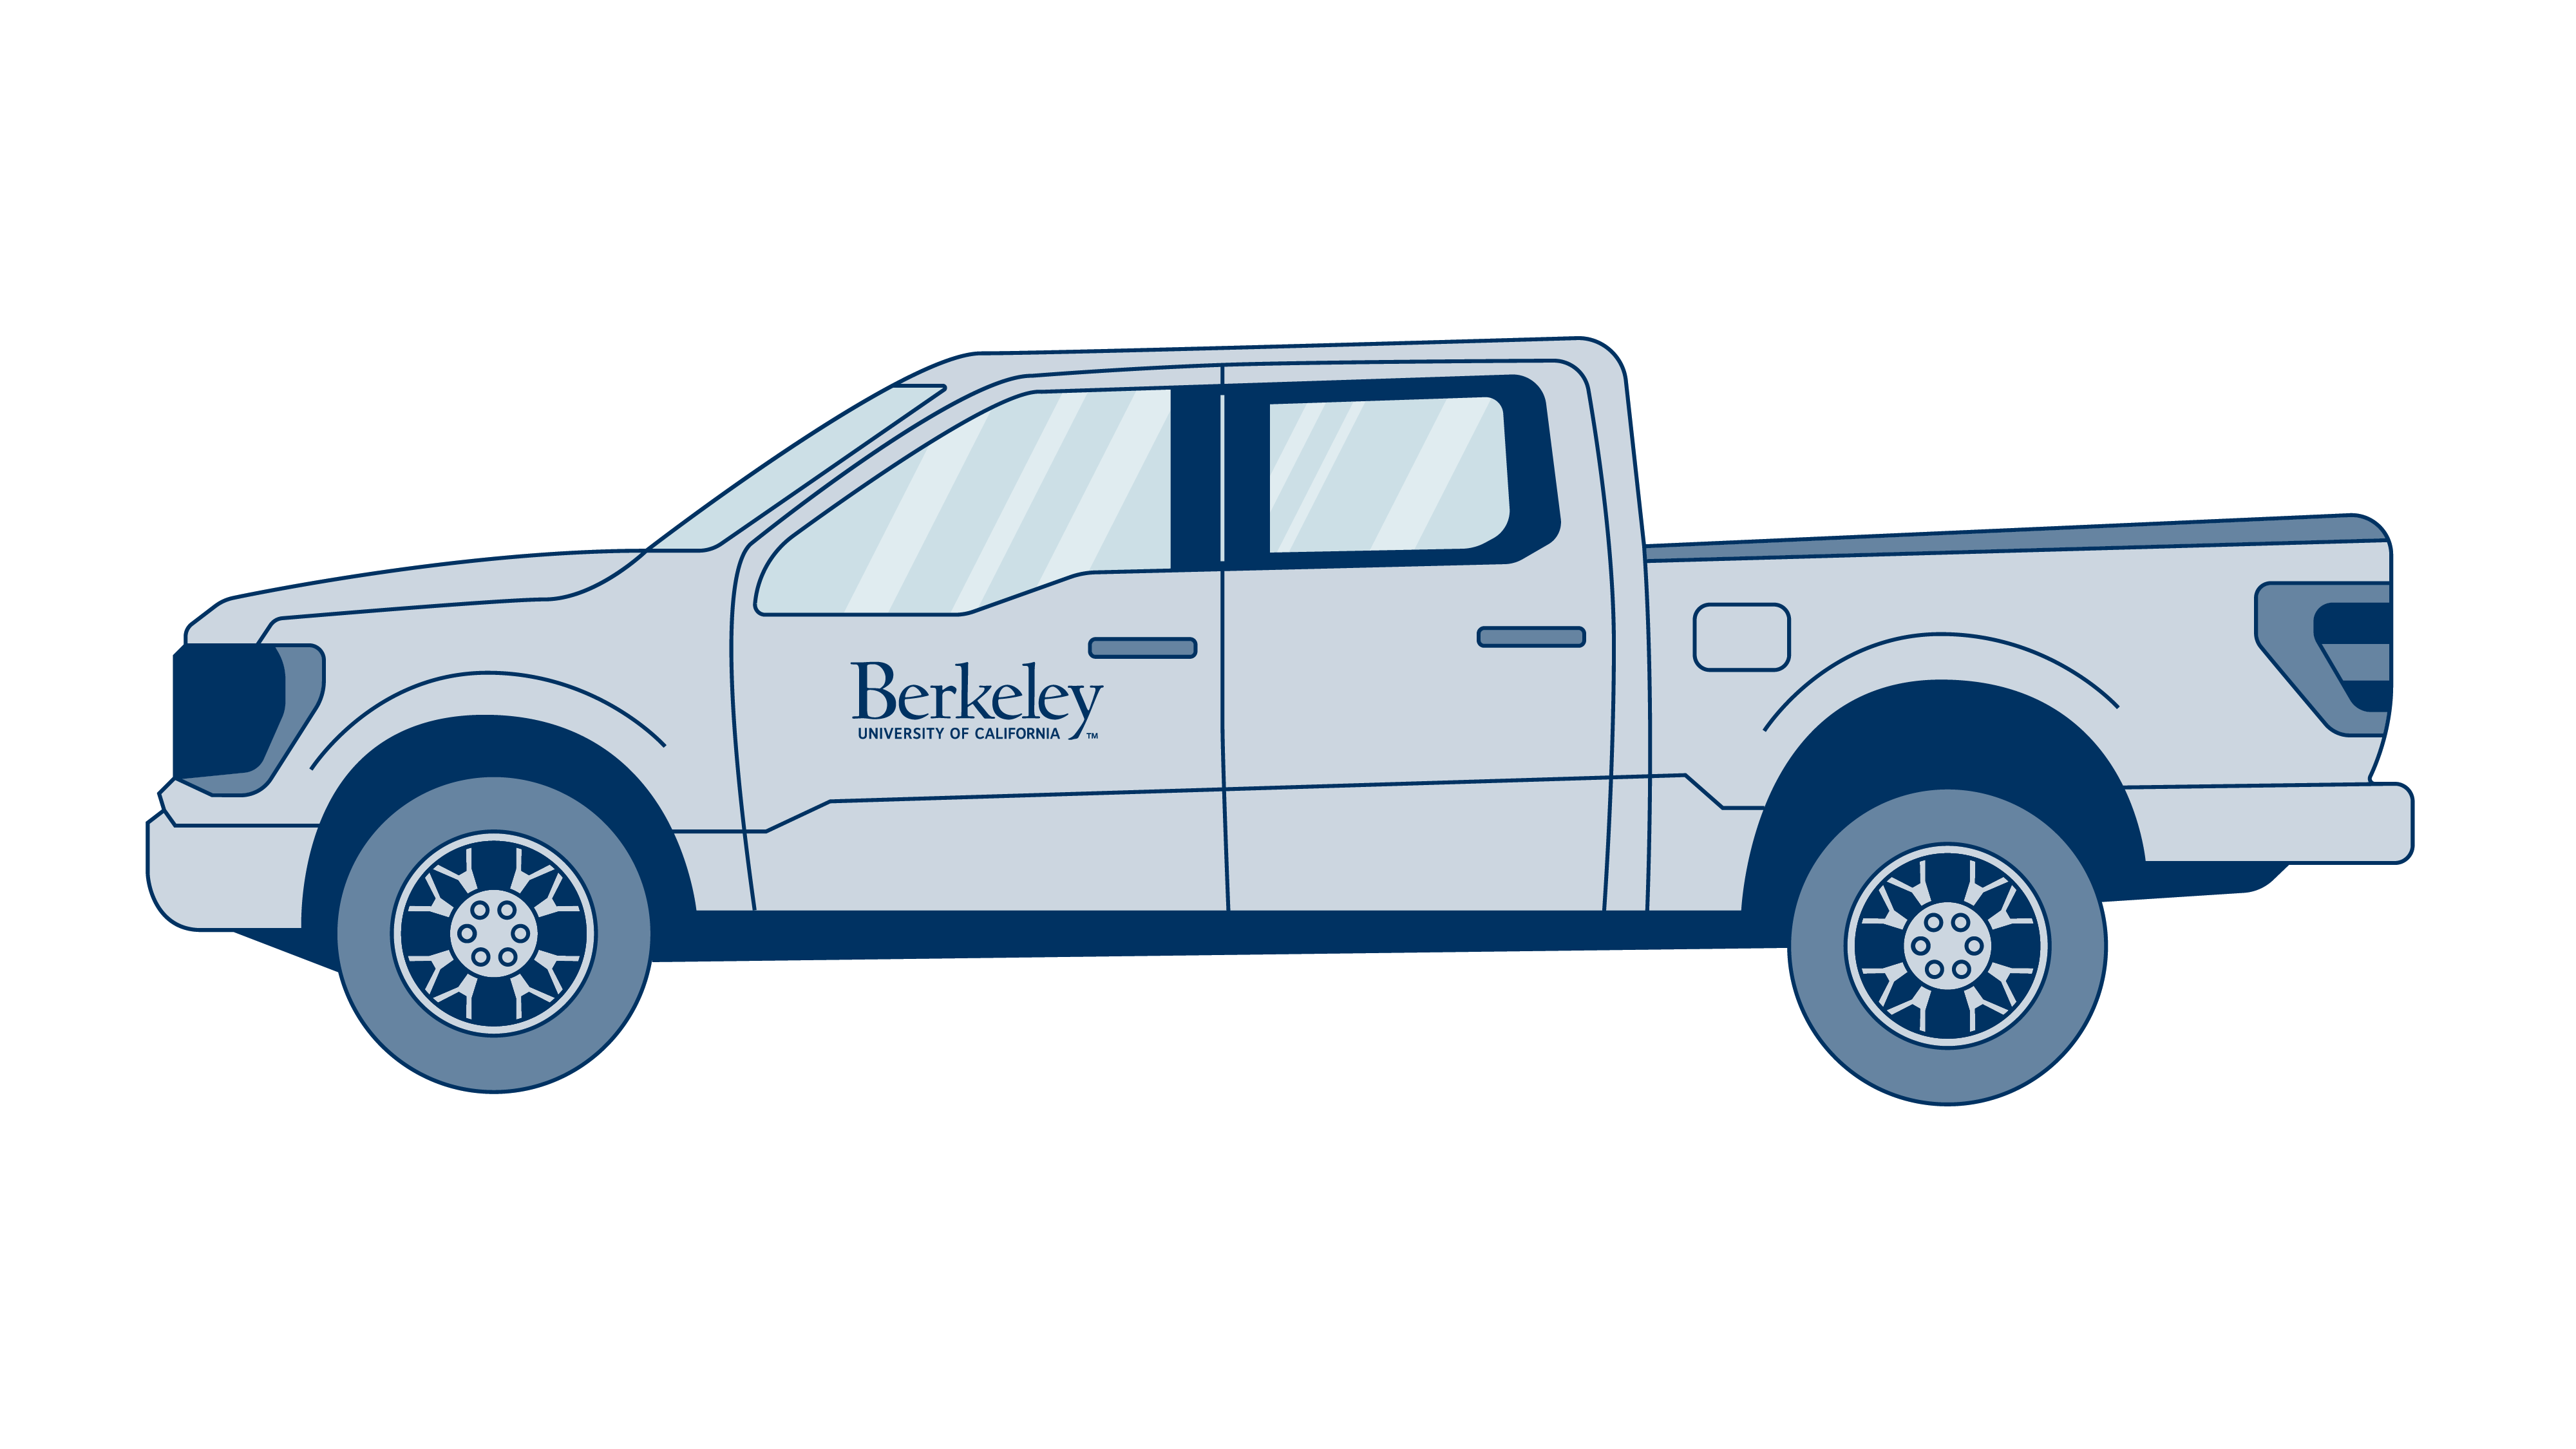 Diagram of logo placement on a Ford F-150